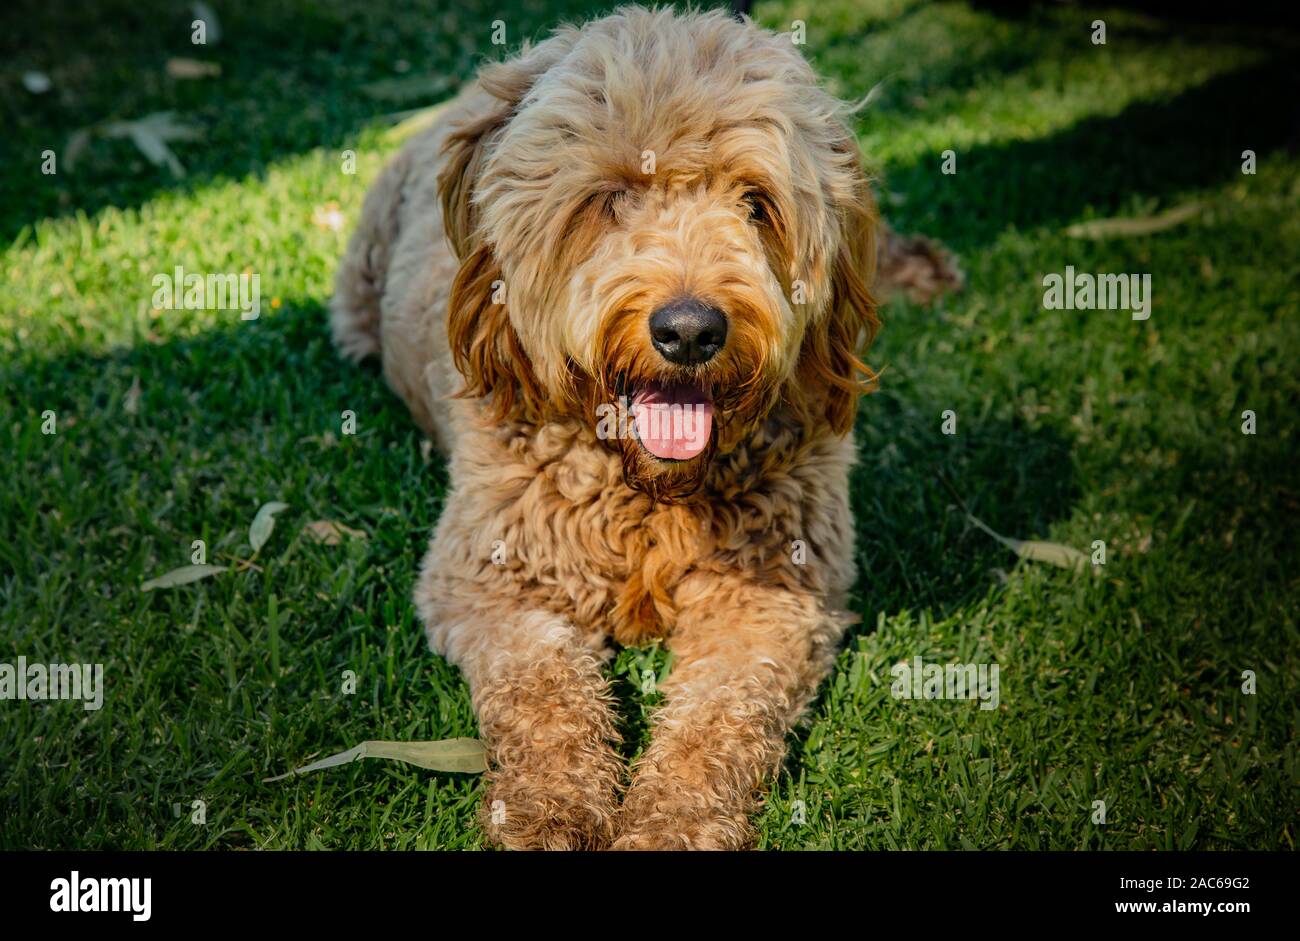 A puppy sitting on grass and sticking his tongue out. Stock Photo